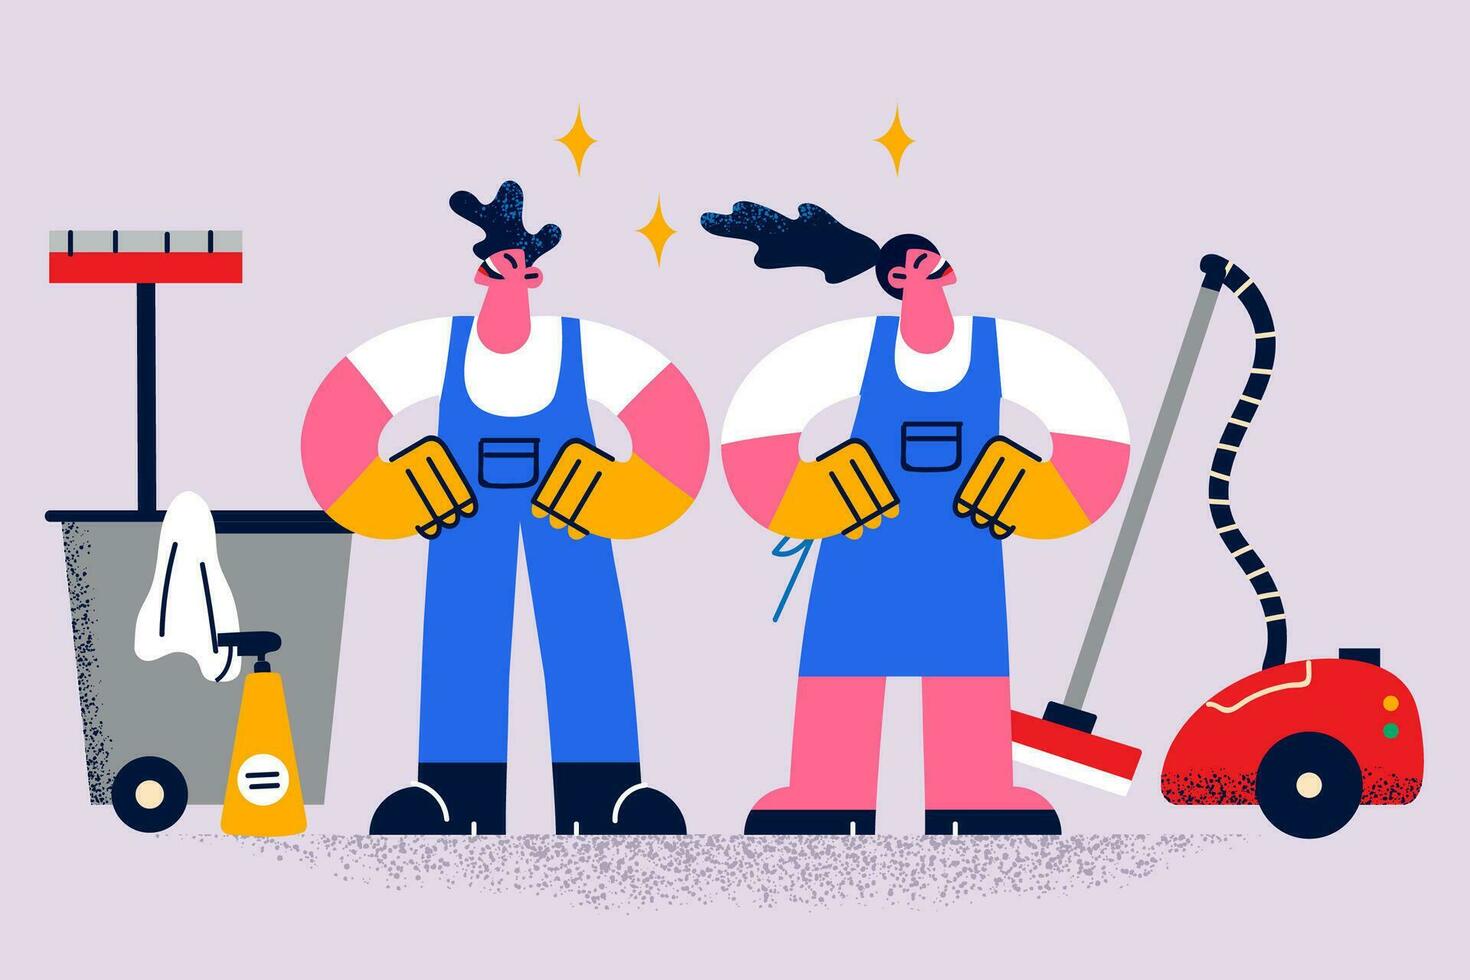 Happy cleaners with tools and detergents take care of office hygiene. Smiling man and woman janitors or housekeepers do chores. Professional cleaning or housekeeping service. Vector illustration.